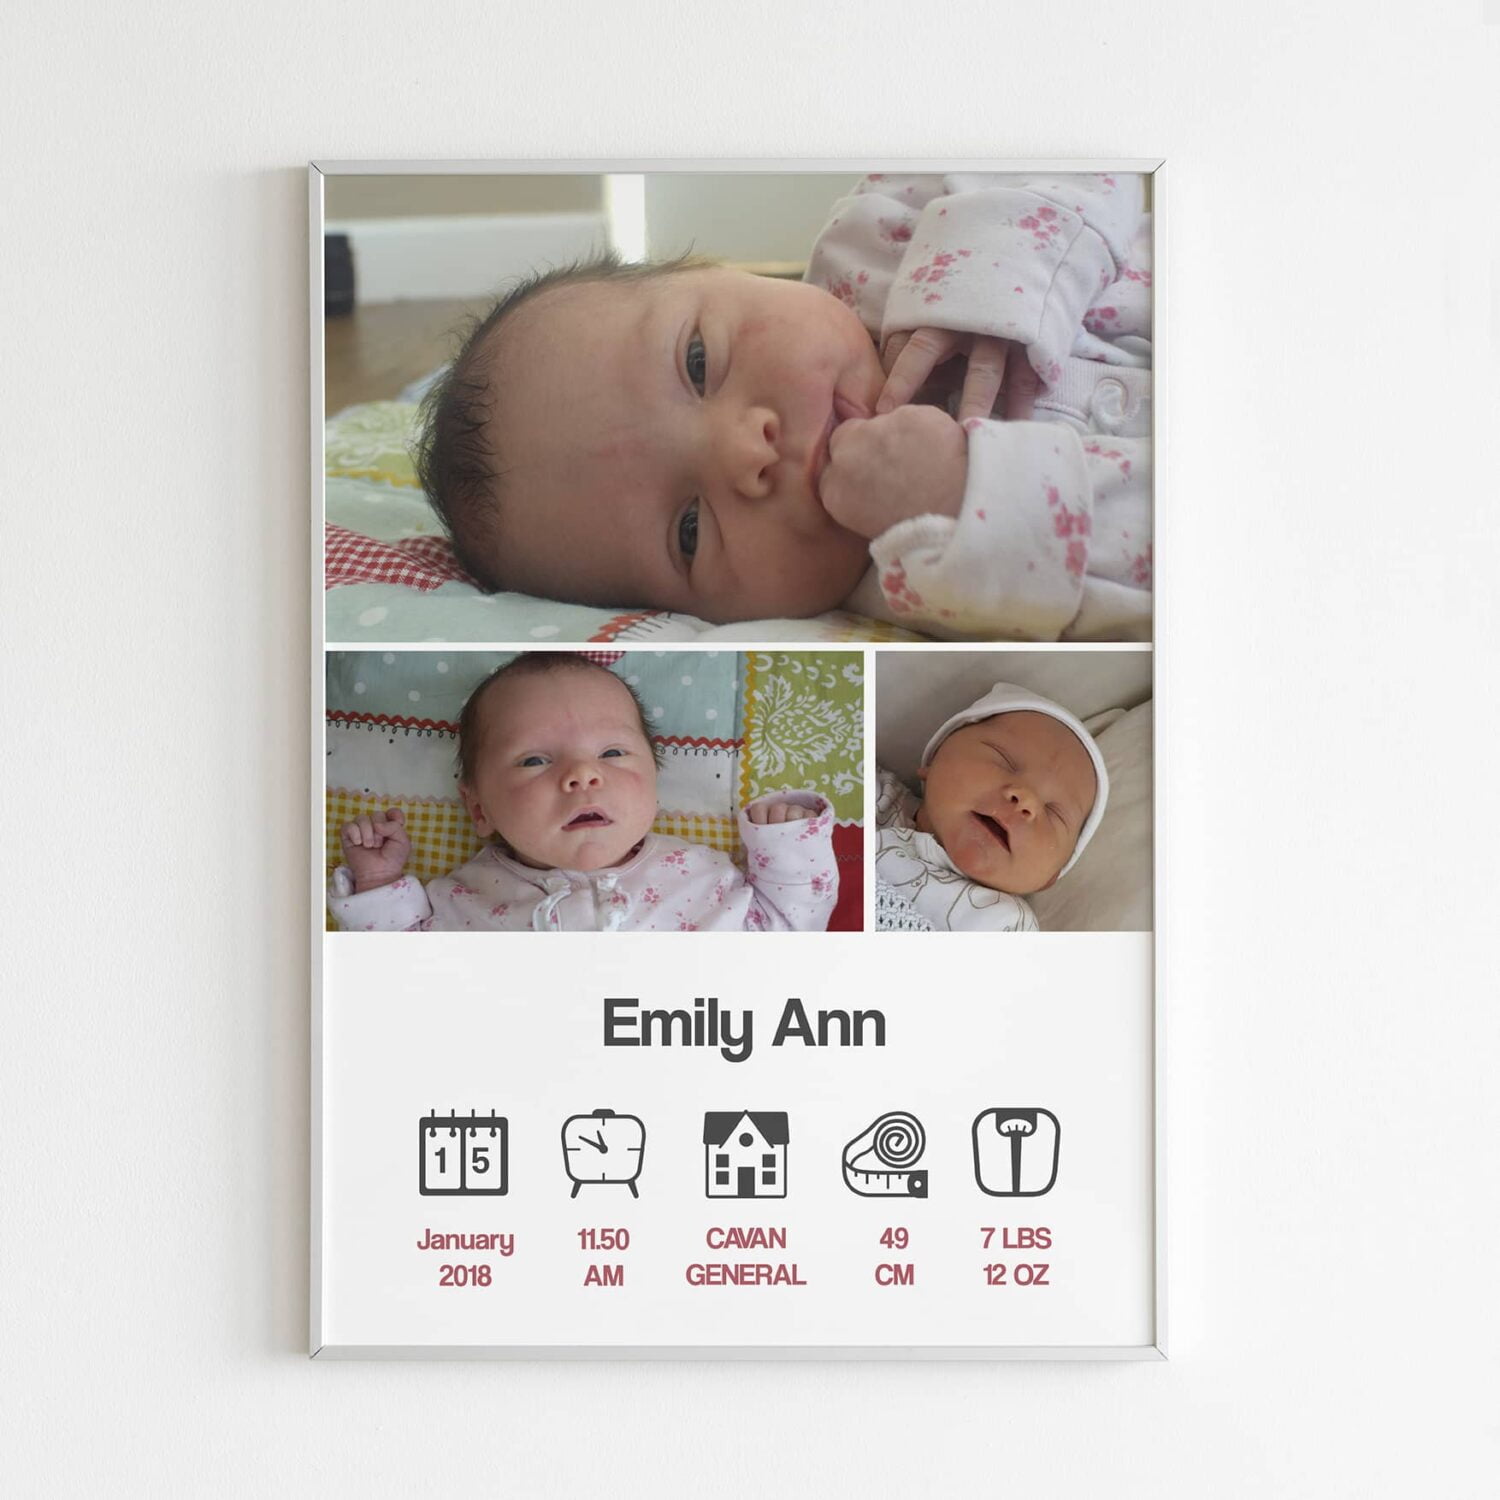 Personalised print that features three photos of your baby along with all the birth details